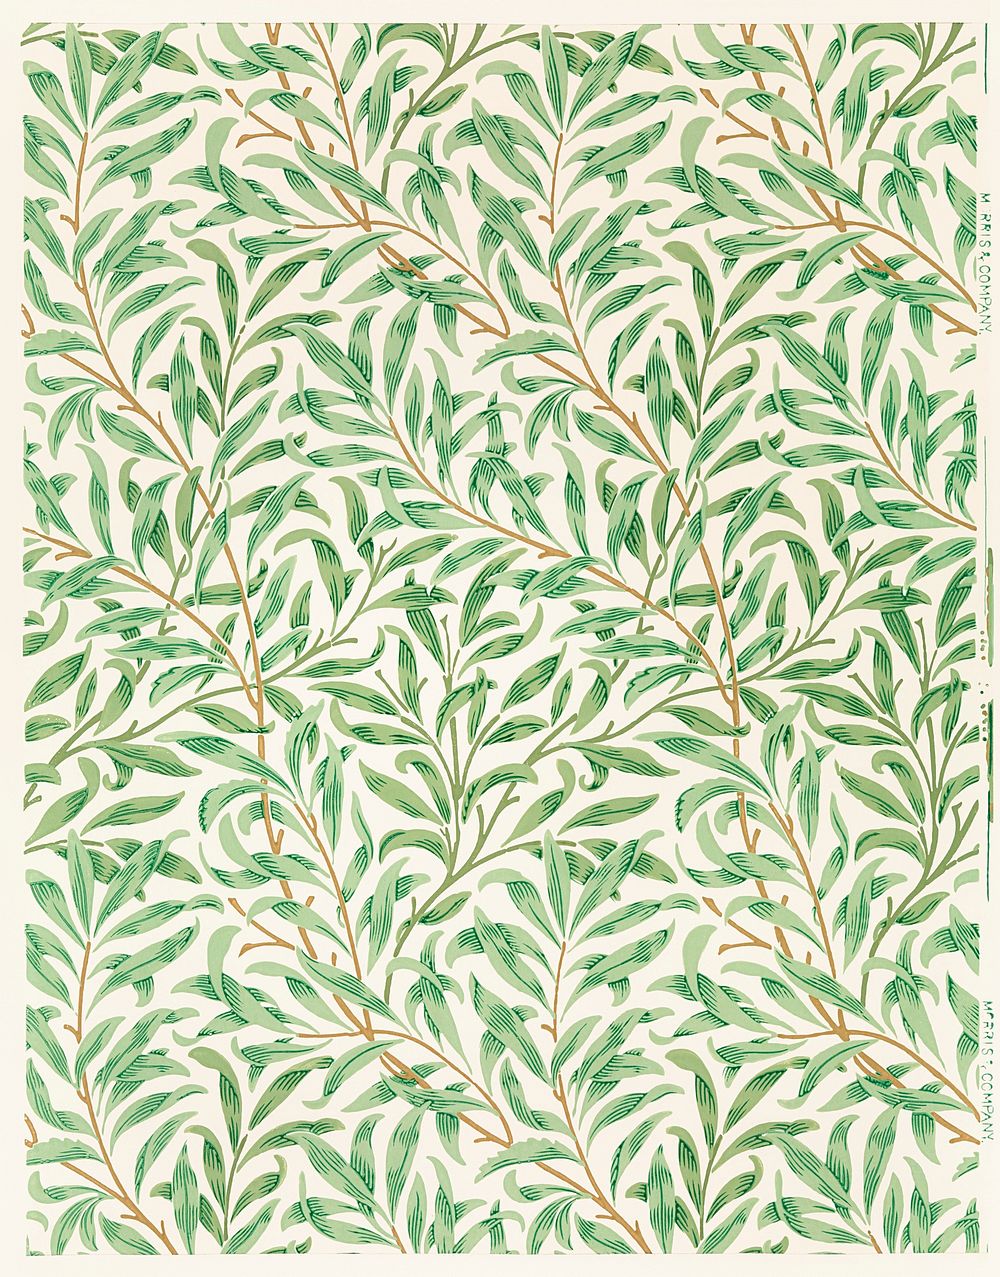 William Morris's (1834-1896) Willow bough famous pattern. Original from The MET Museum. Digitally enhanced by rawpixel.